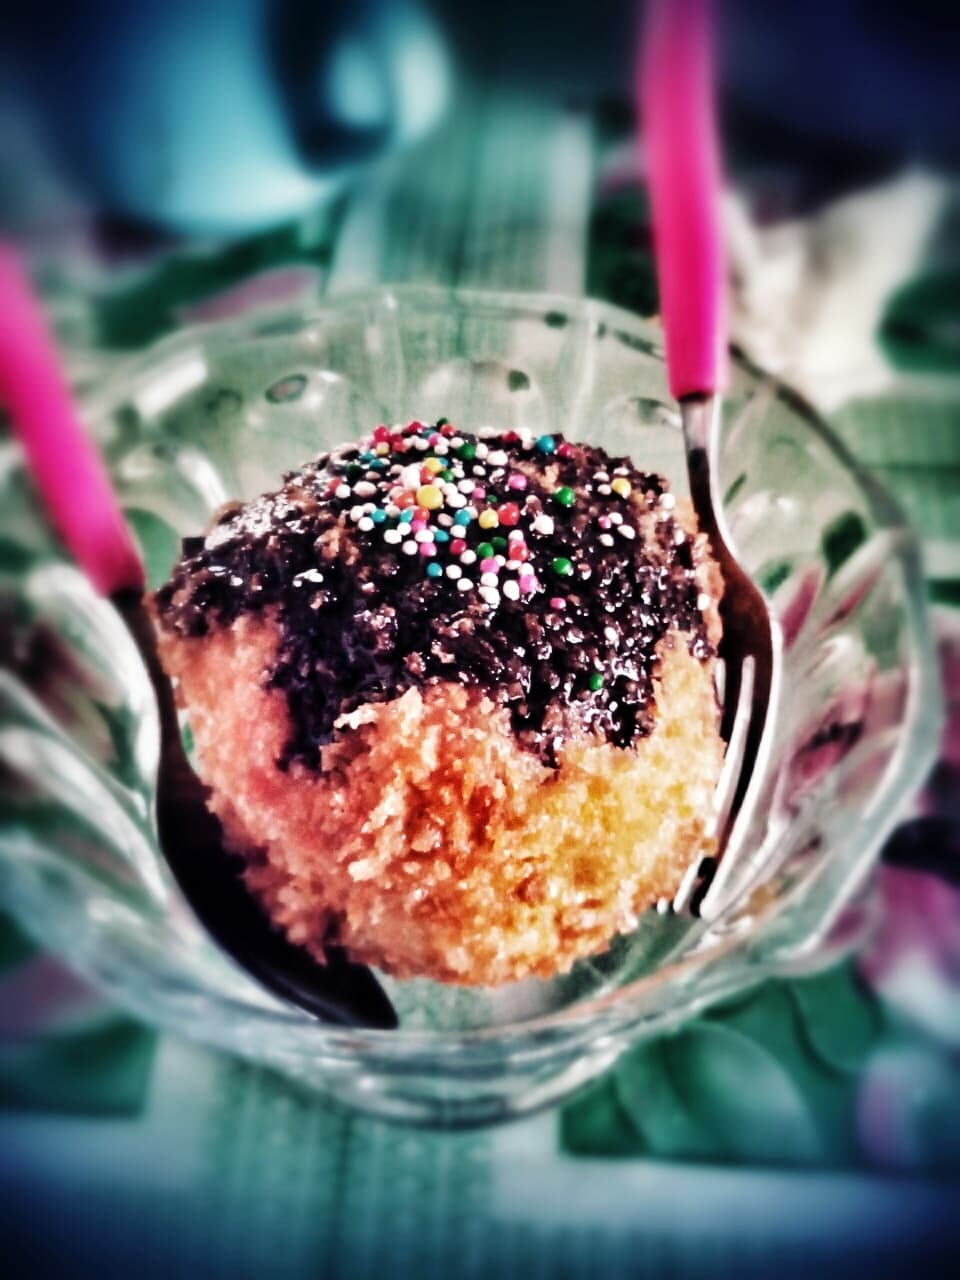 Fried ice cream with sprinkles in glass cup